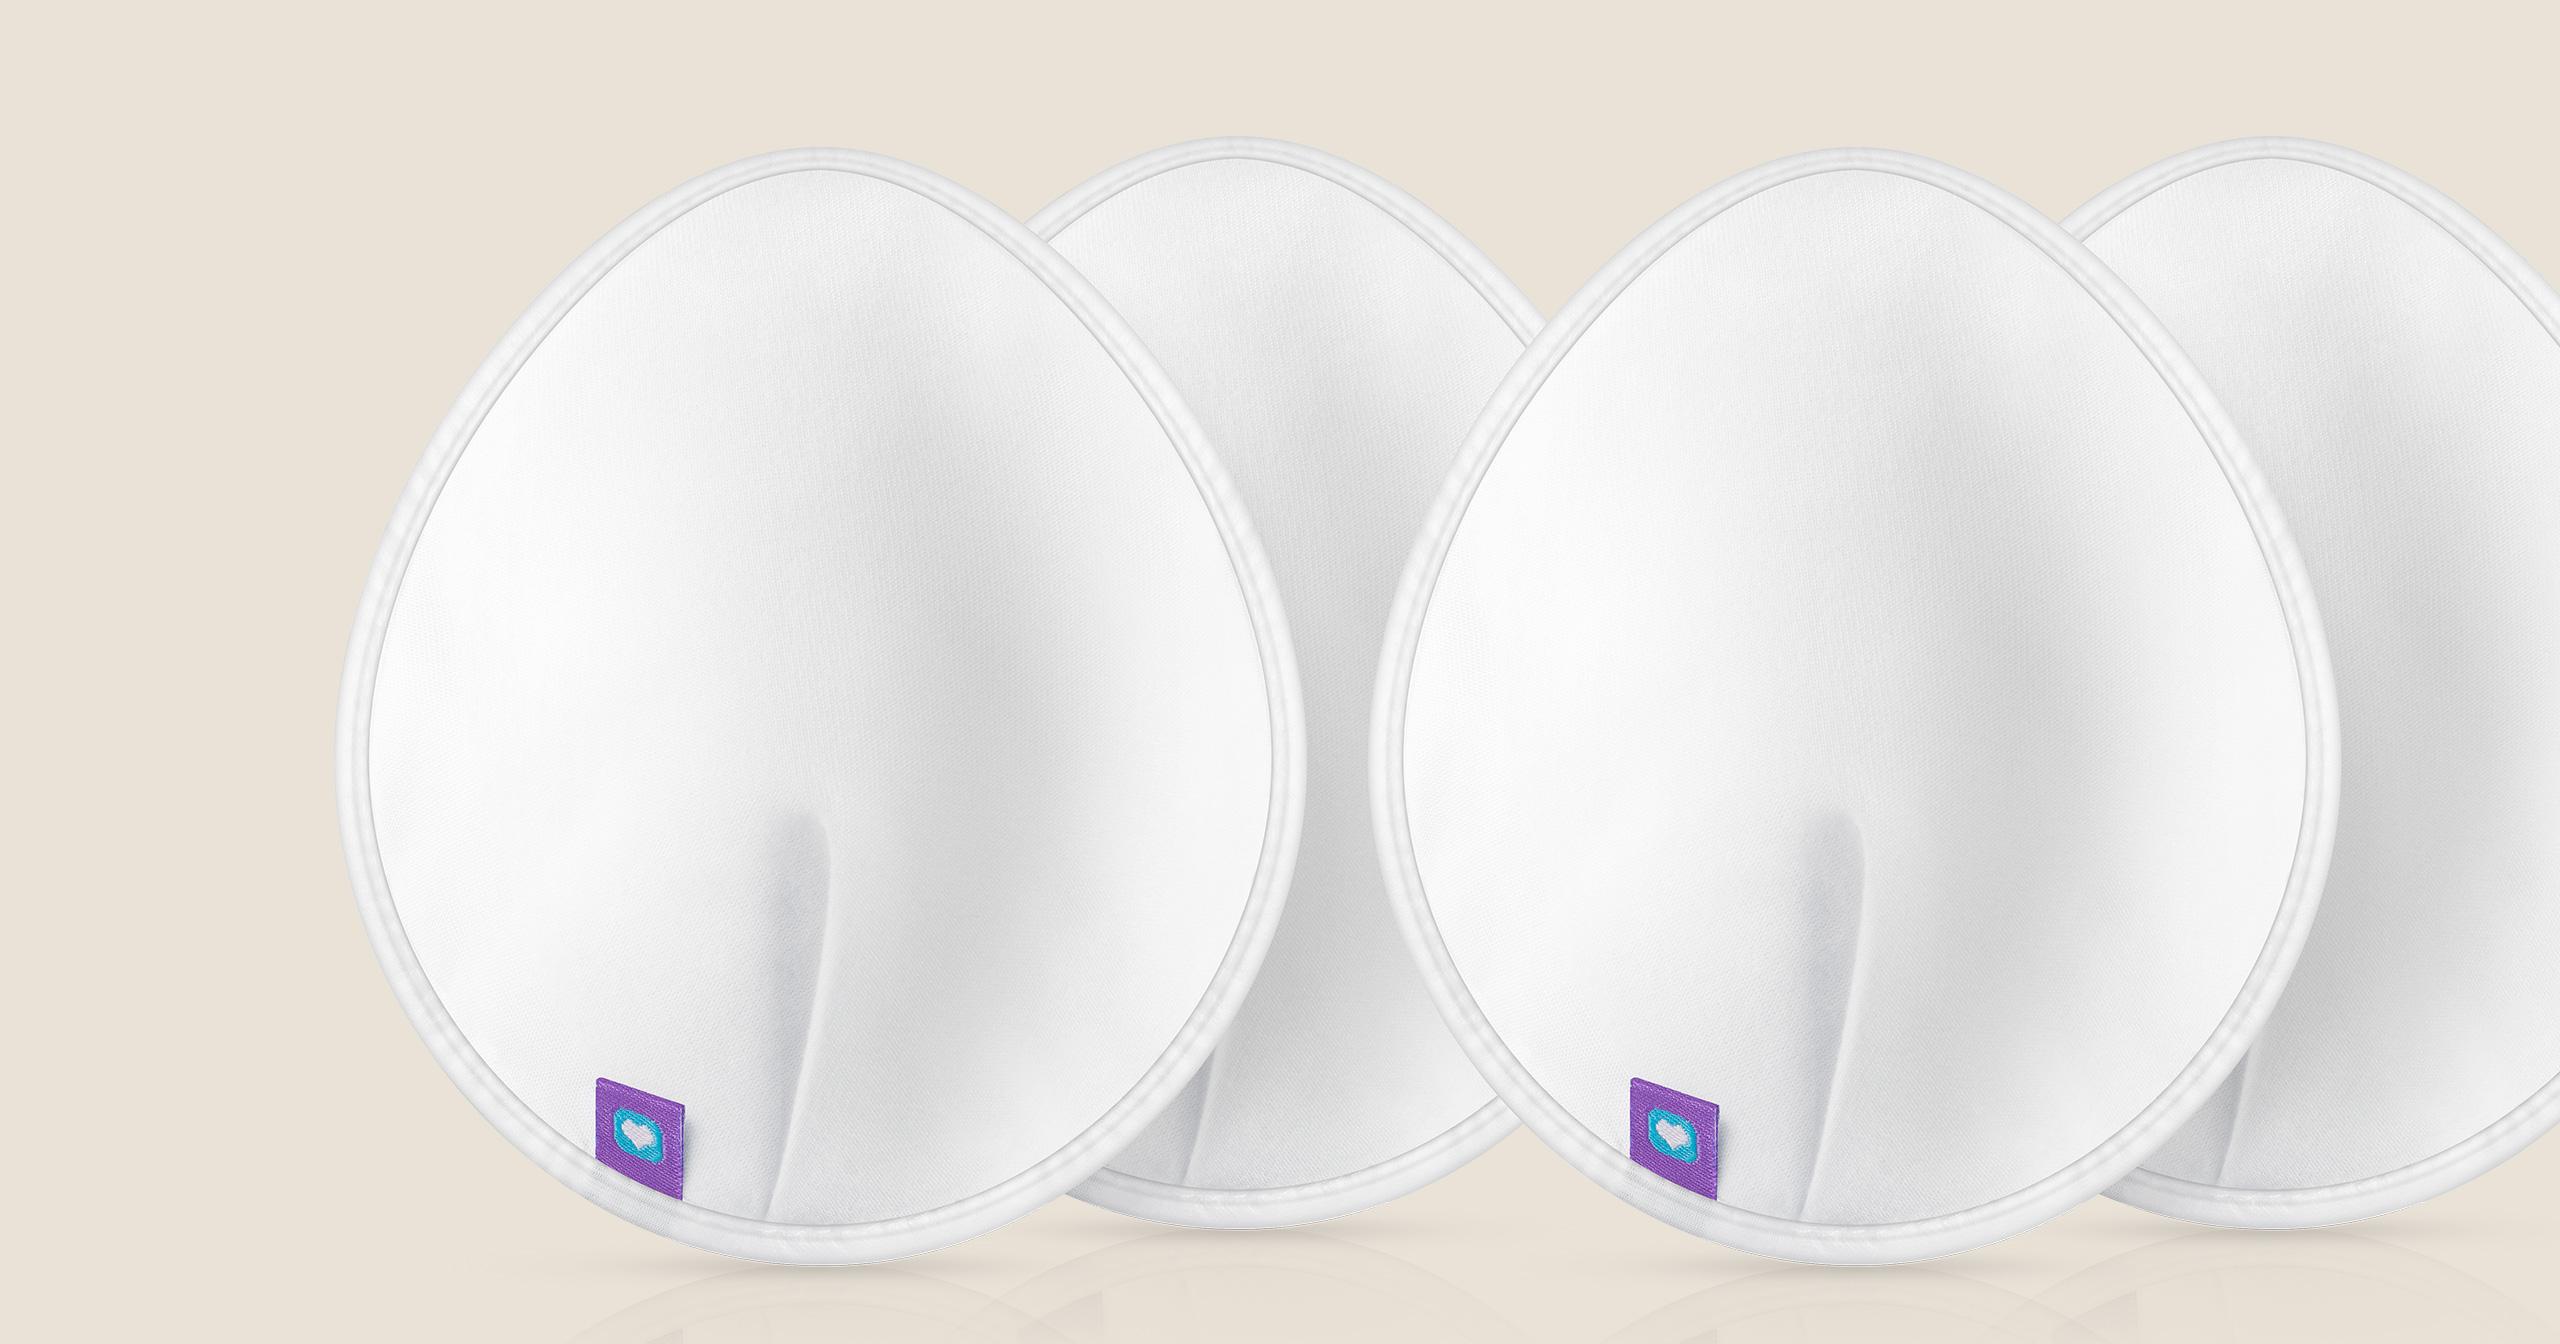 Washable nursing pads product imagery for Lansinoh by Vibe Studio